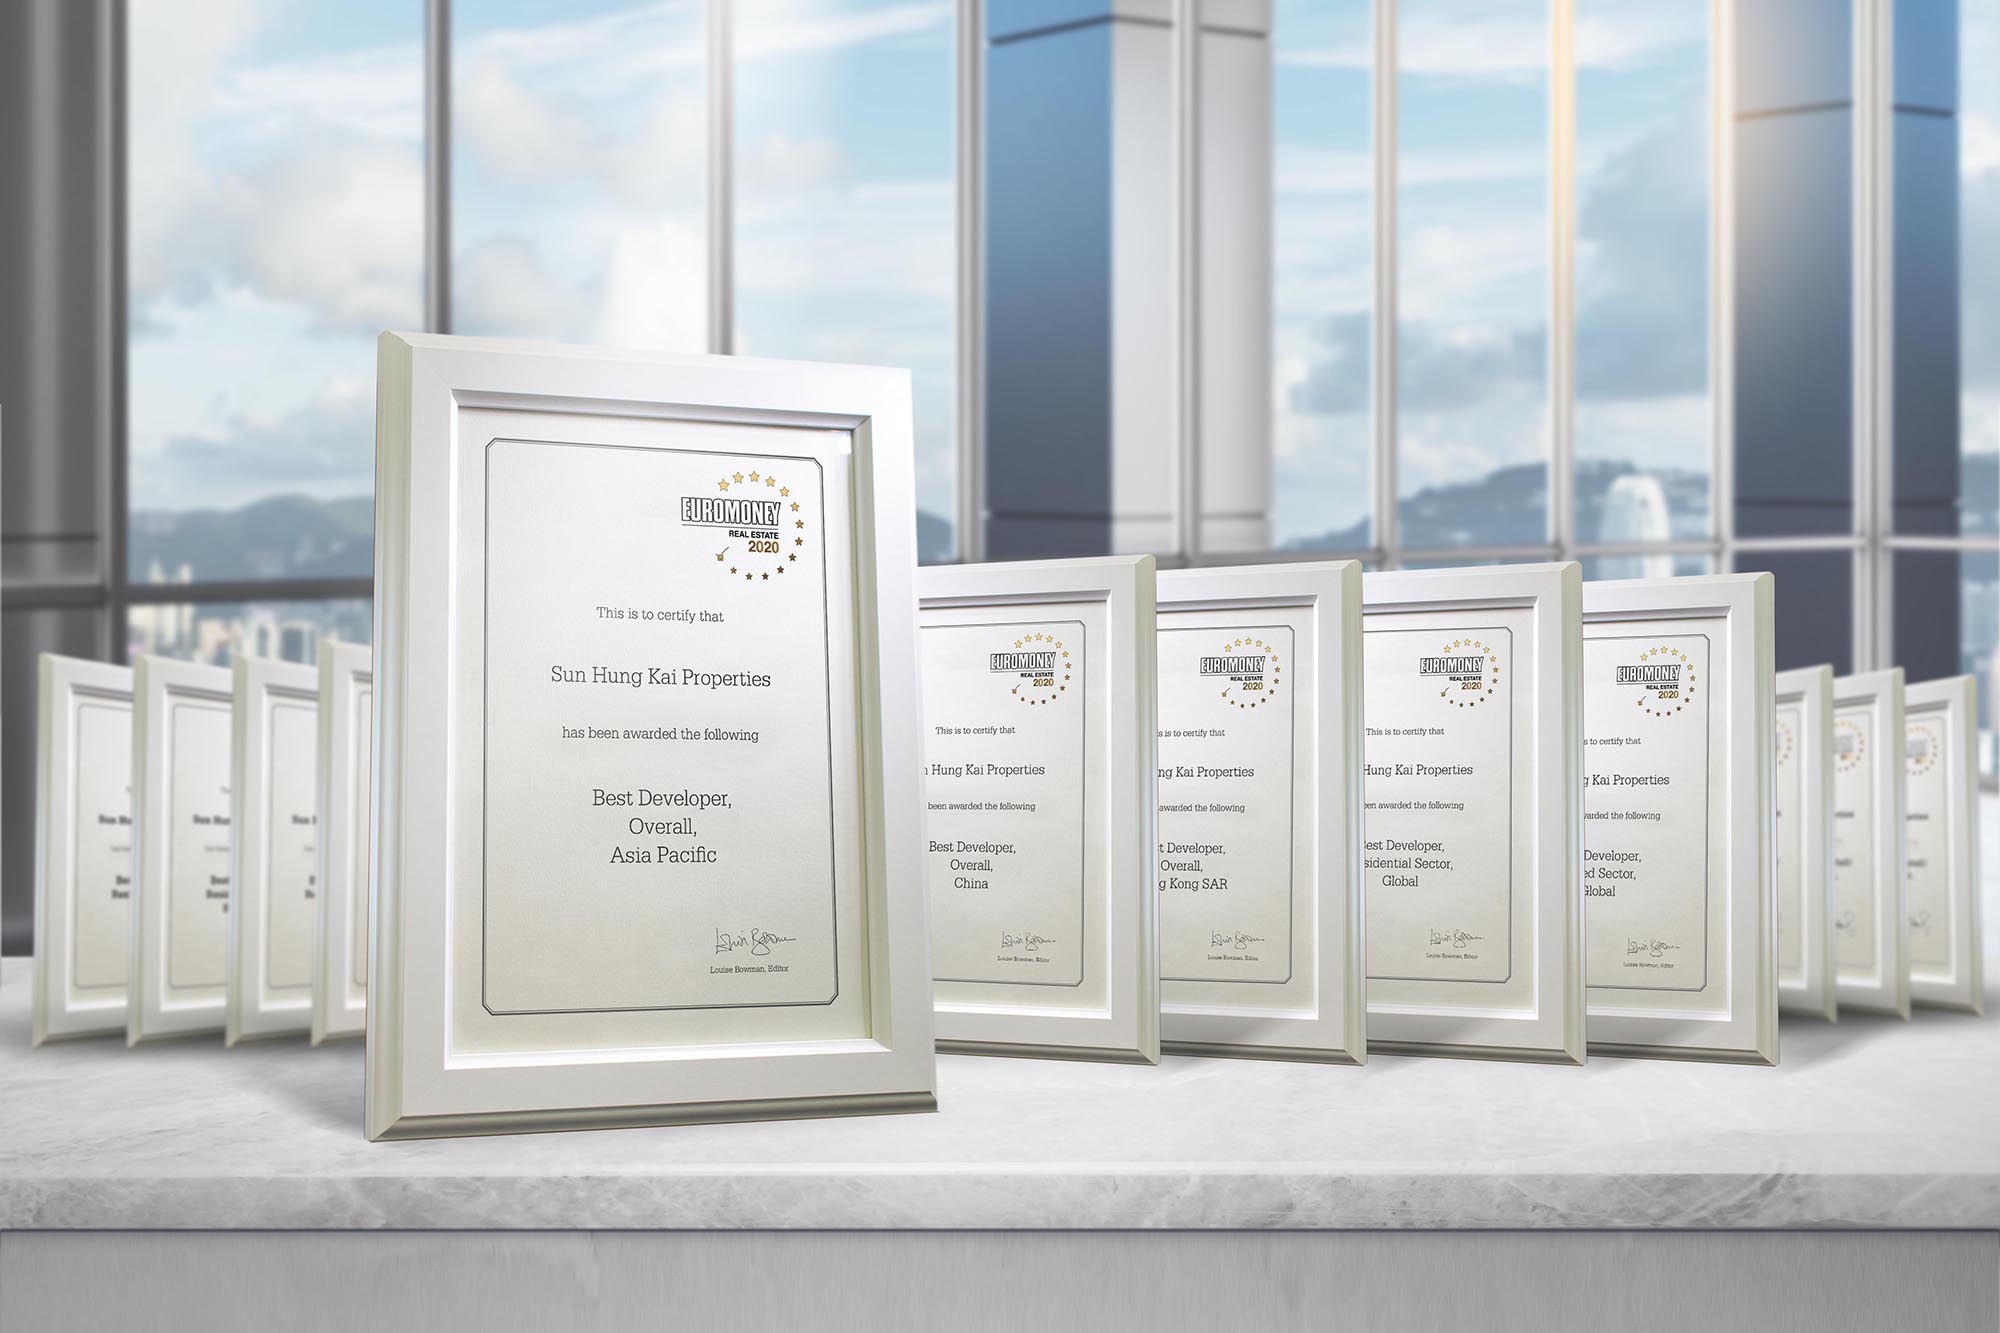 Receives a record high of 24 awards from Euromoney